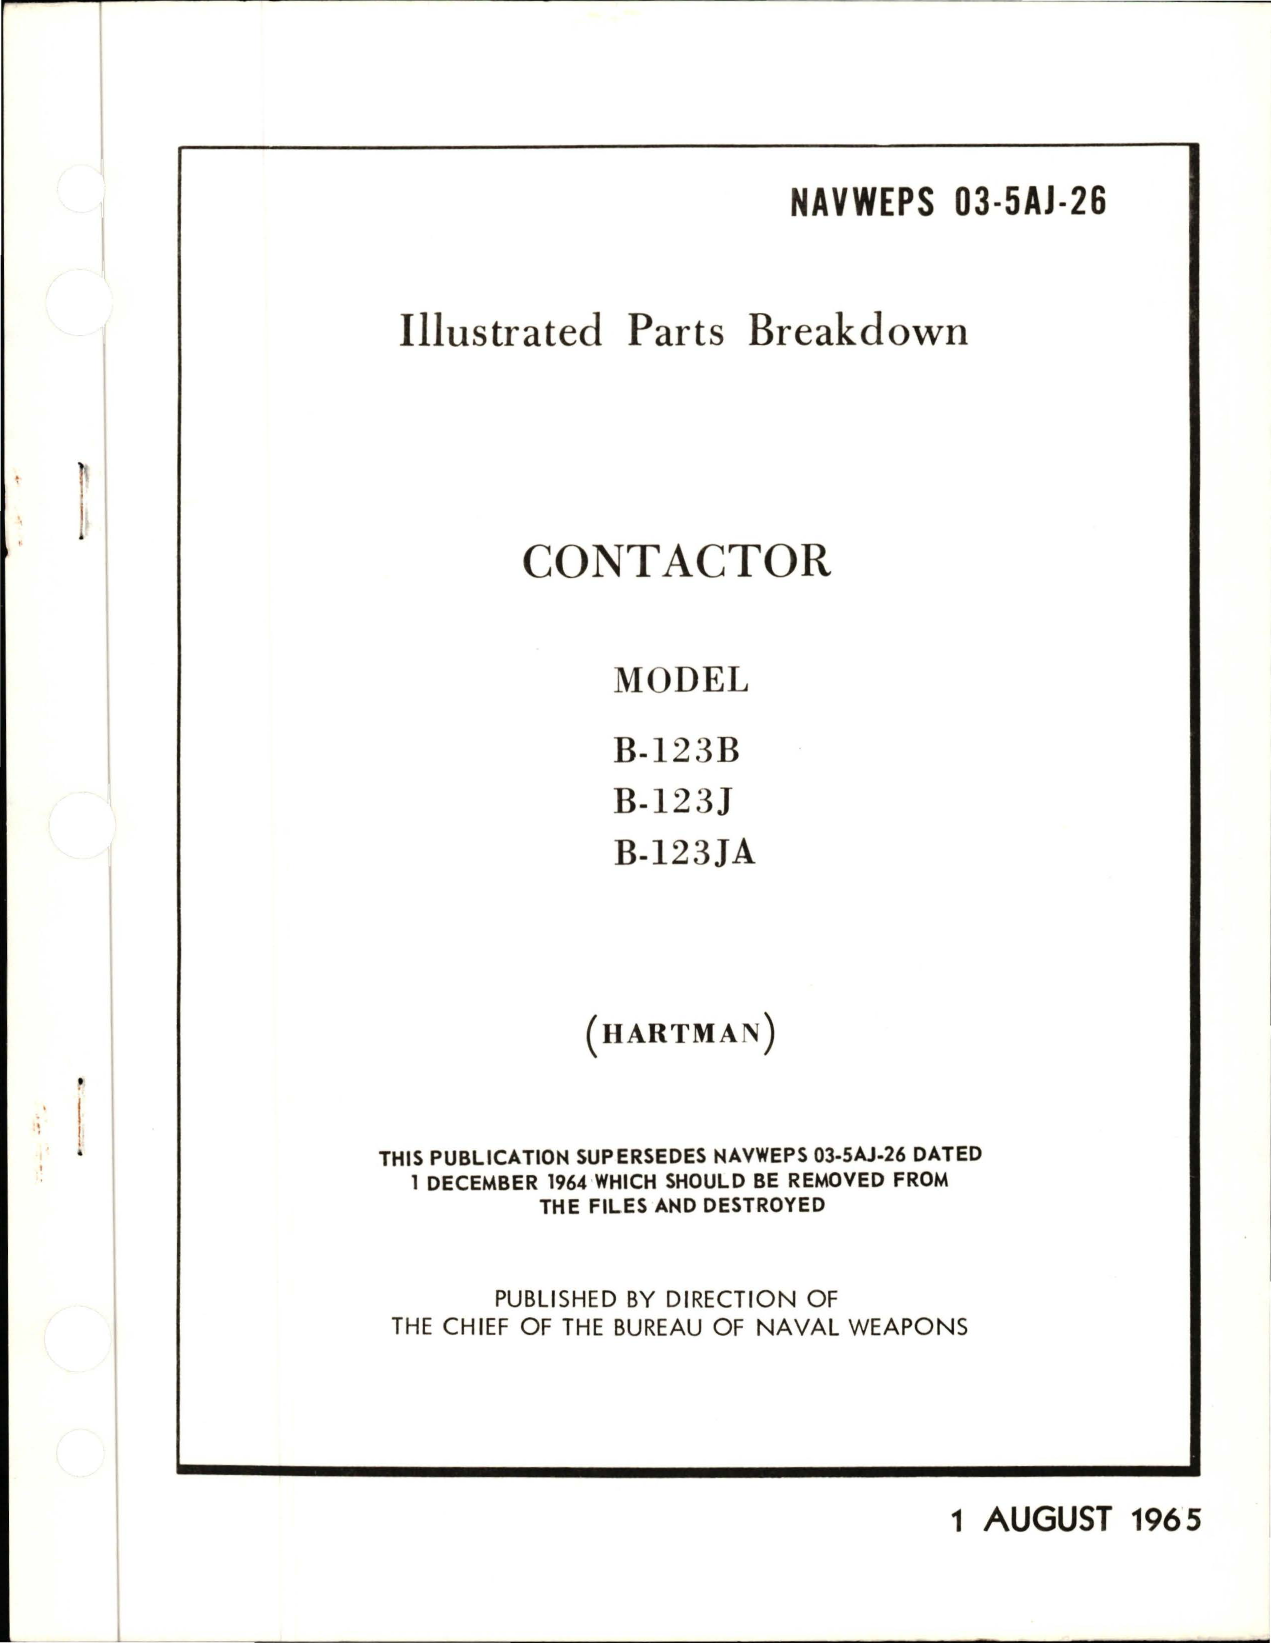 Sample page 1 from AirCorps Library document: Illustrated Parts Breakdown for Contactor - Models B-123B, B-123J, and B-123JA 